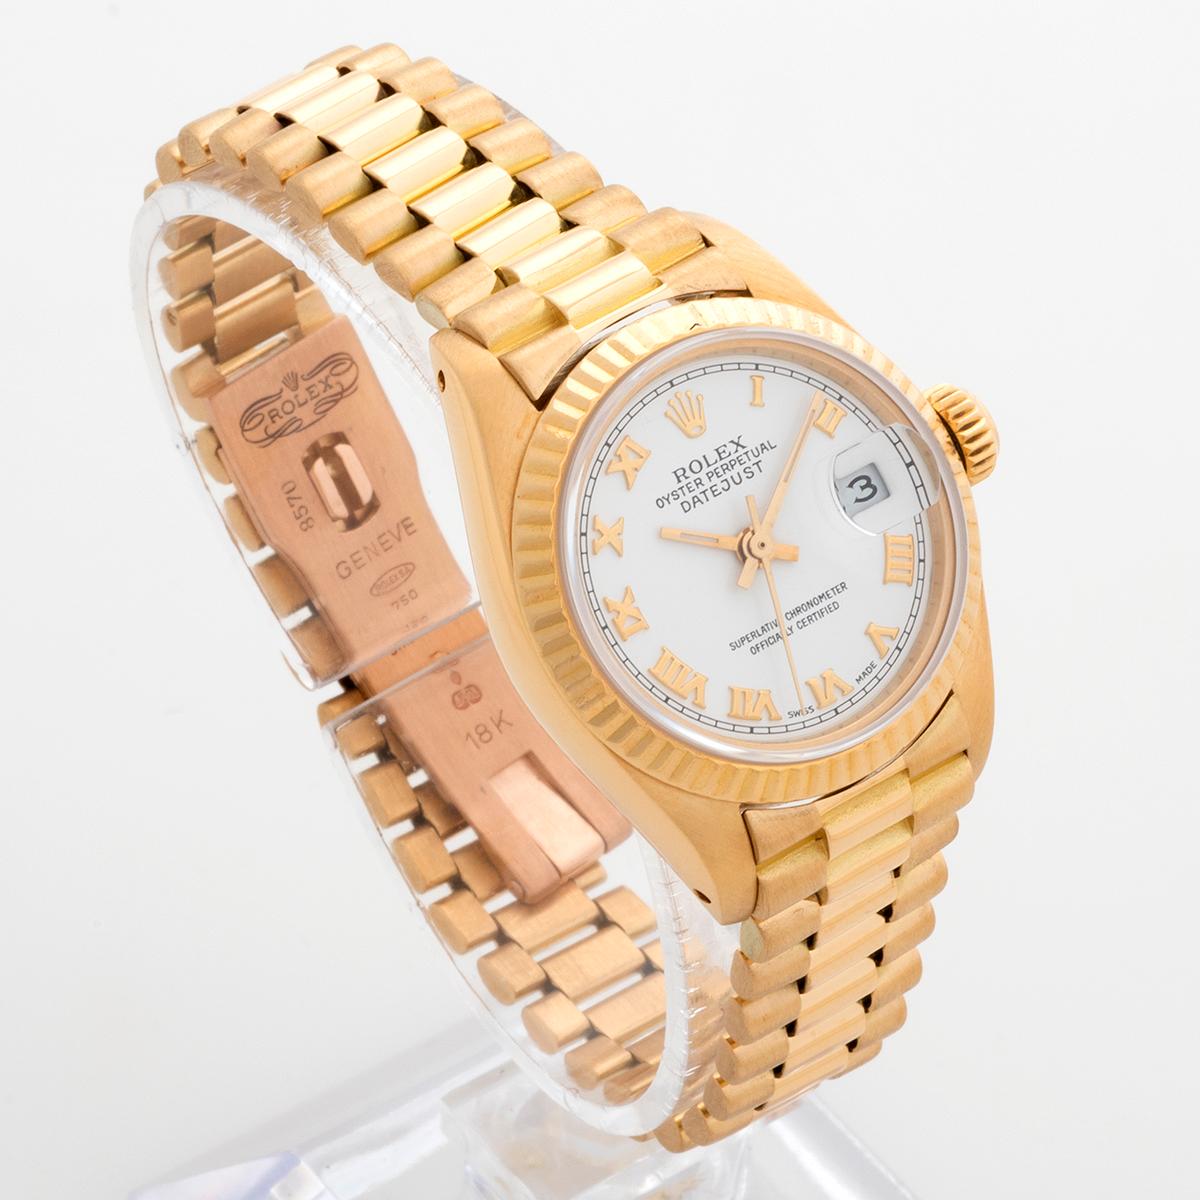 Our ladies Rolex Datejust, reference 6917 / 8 features an 18k yellow gold case and 18k yellow gold president style bracelet. This example is presented in very good condition, with a strong case, service white Roman numeral dial, and some stretch to